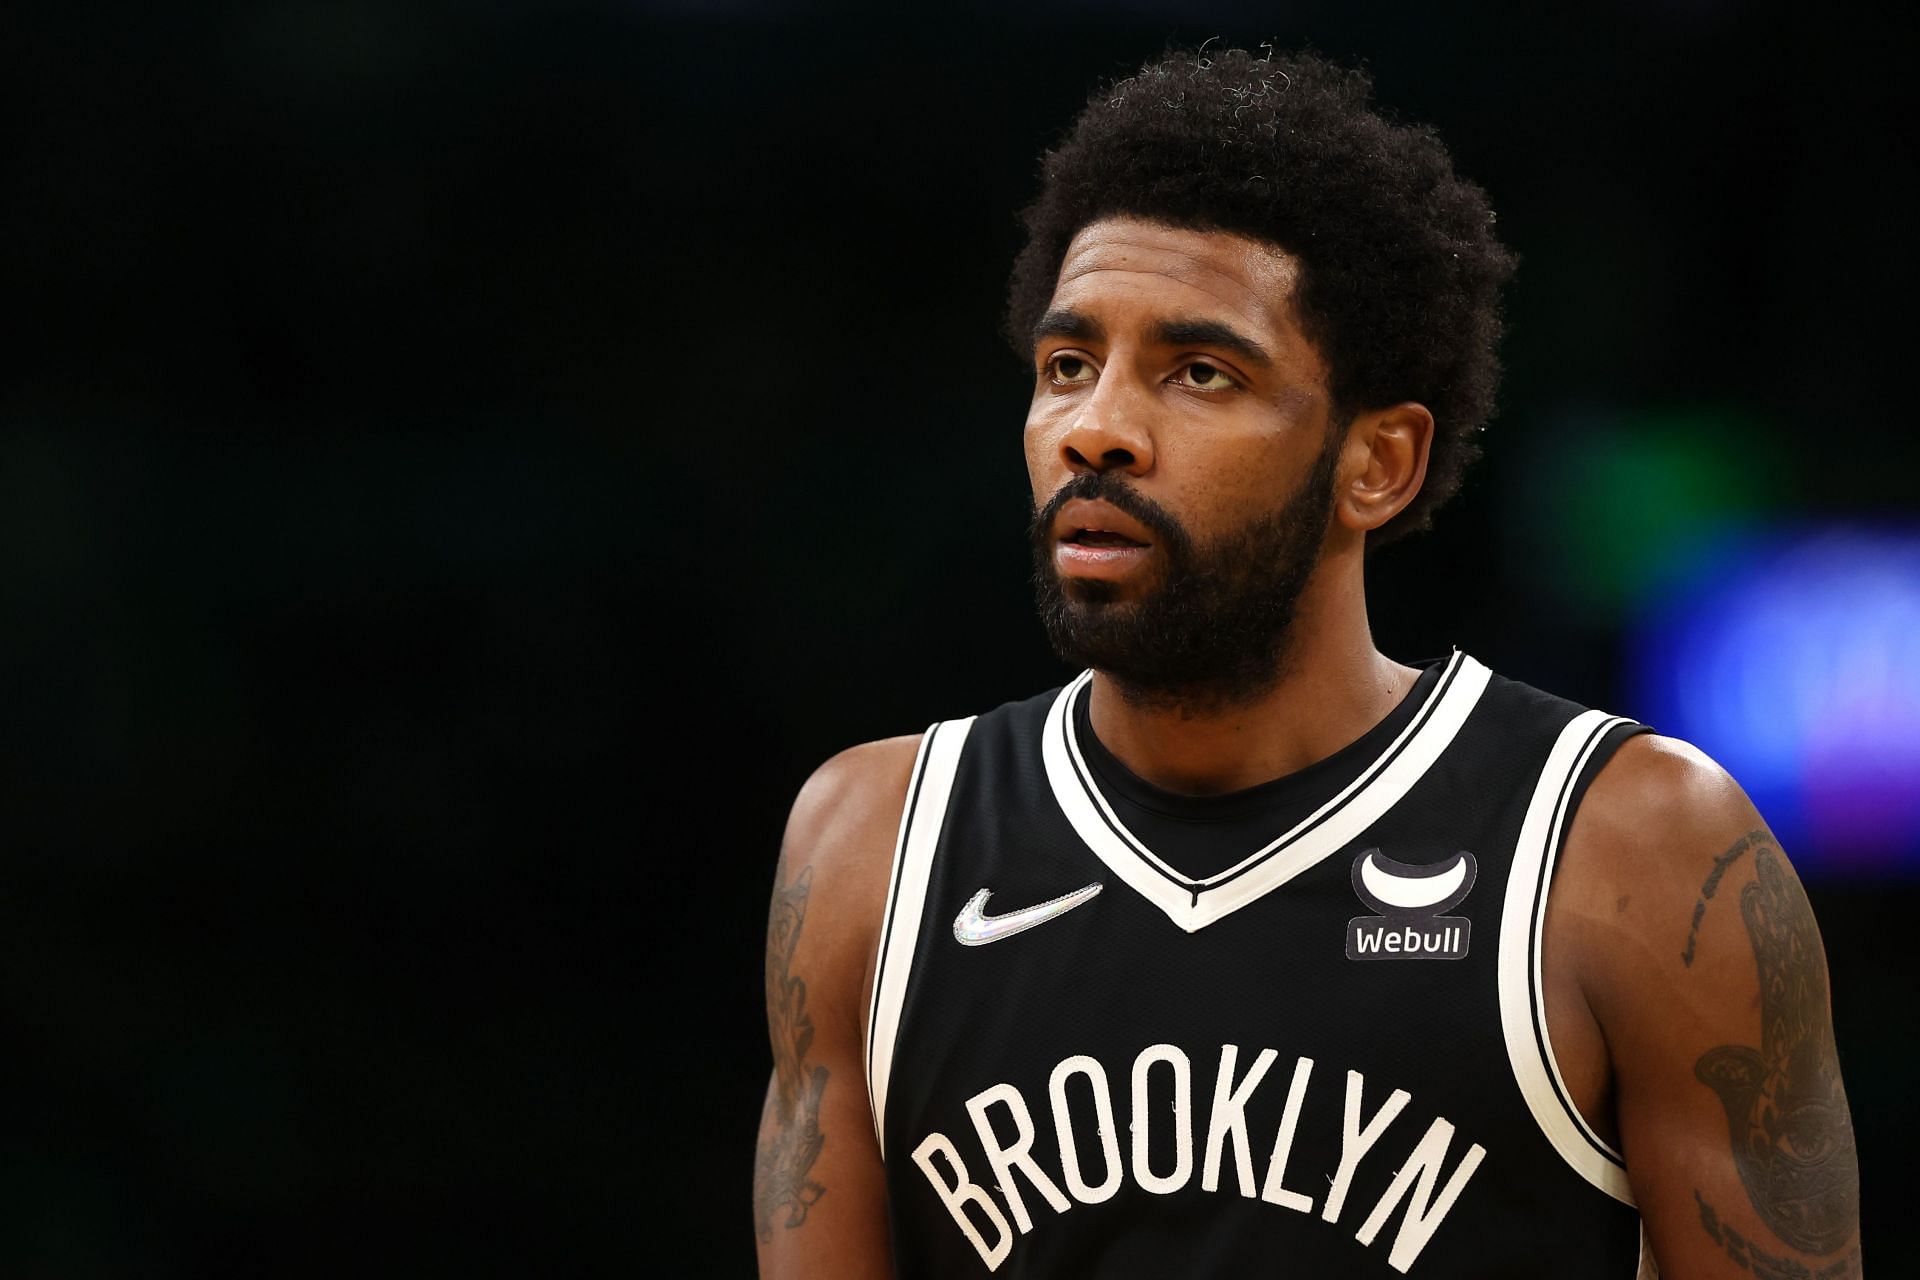 Irving is a fantastic player, but his controversial personality may cost him a lot. [Image Credit: Getty Images]